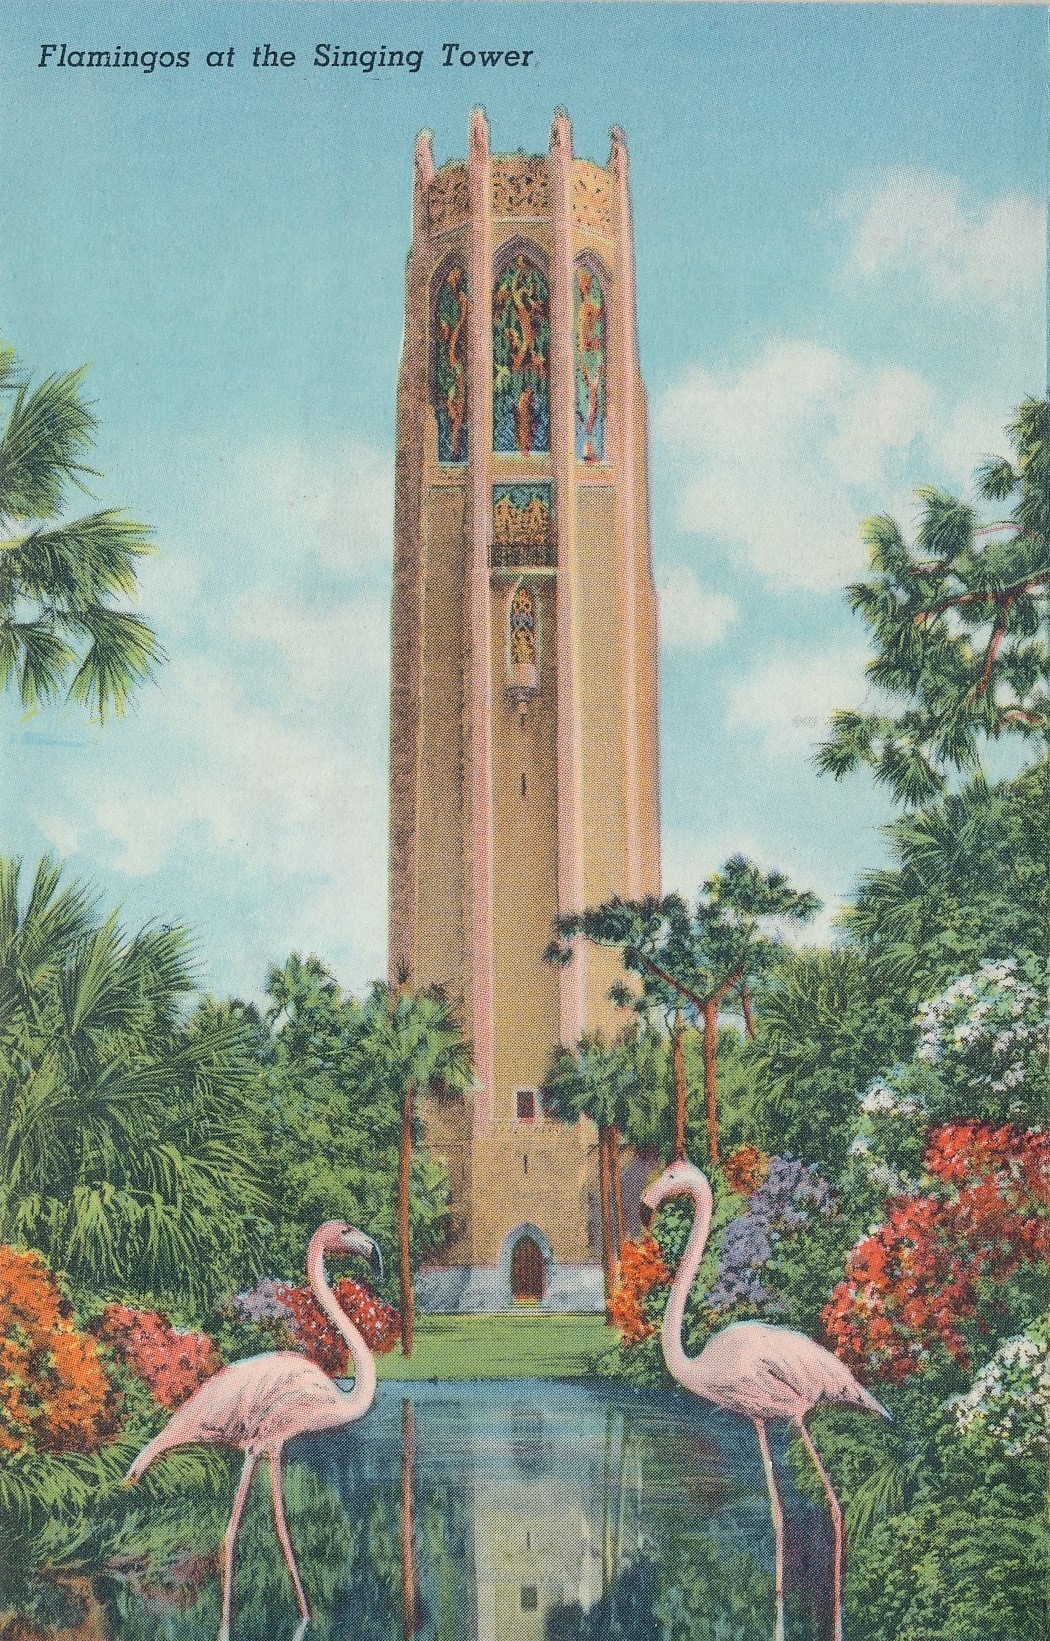 DR. PATRICK’S POSTCARD ROADSIDE: The Rise of Modernism in Florida’s Tourist Towers